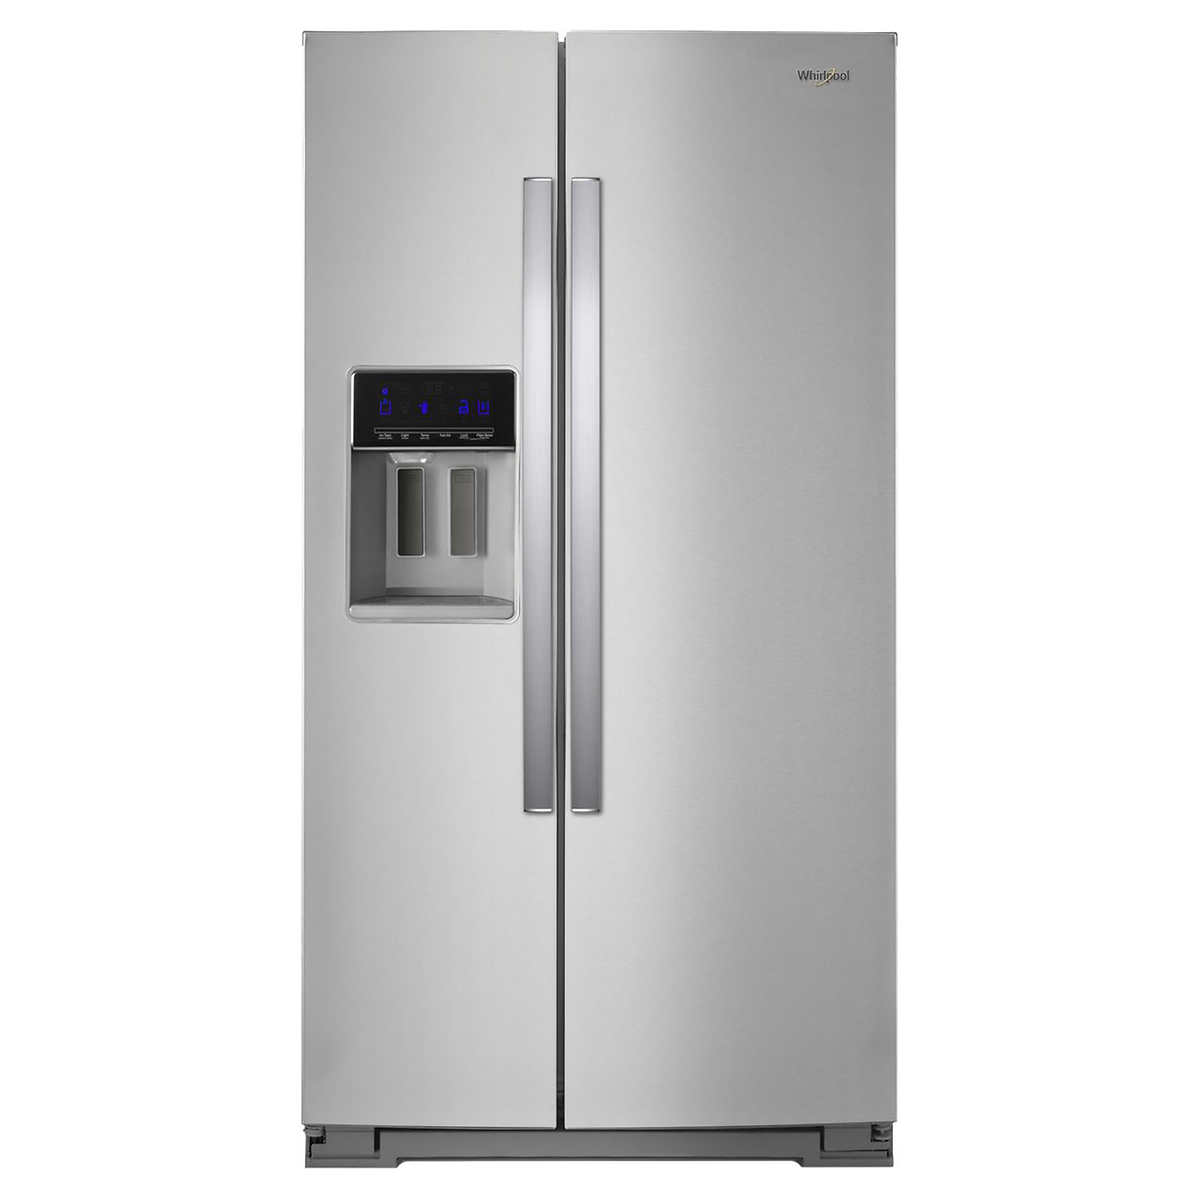 Whirlpool 28 cu. ft. Side-by-Side Refrigerator with Exterior Ice and Water Dispenser - $1500 at Costco